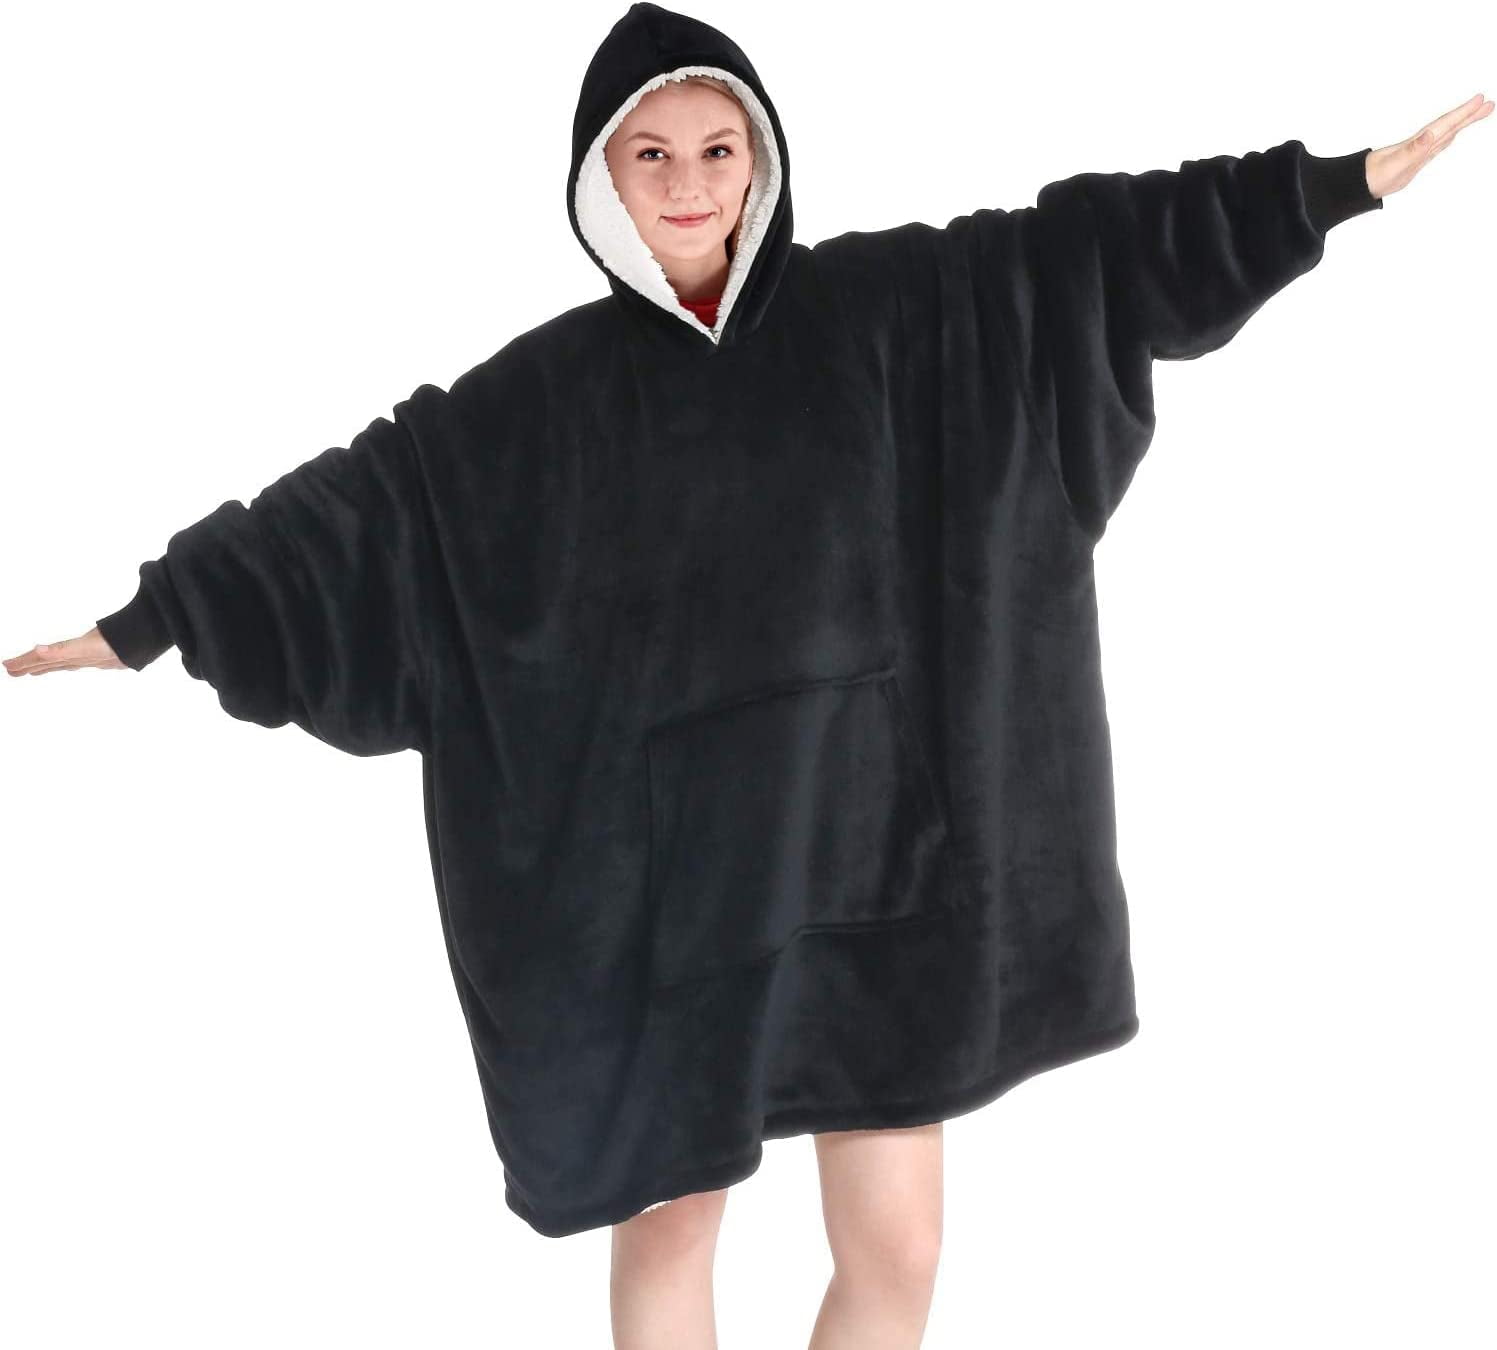 Wearable Hoodie Blanket Sweatshirt Hood Super Soft and Cozy in One Size  Fits All